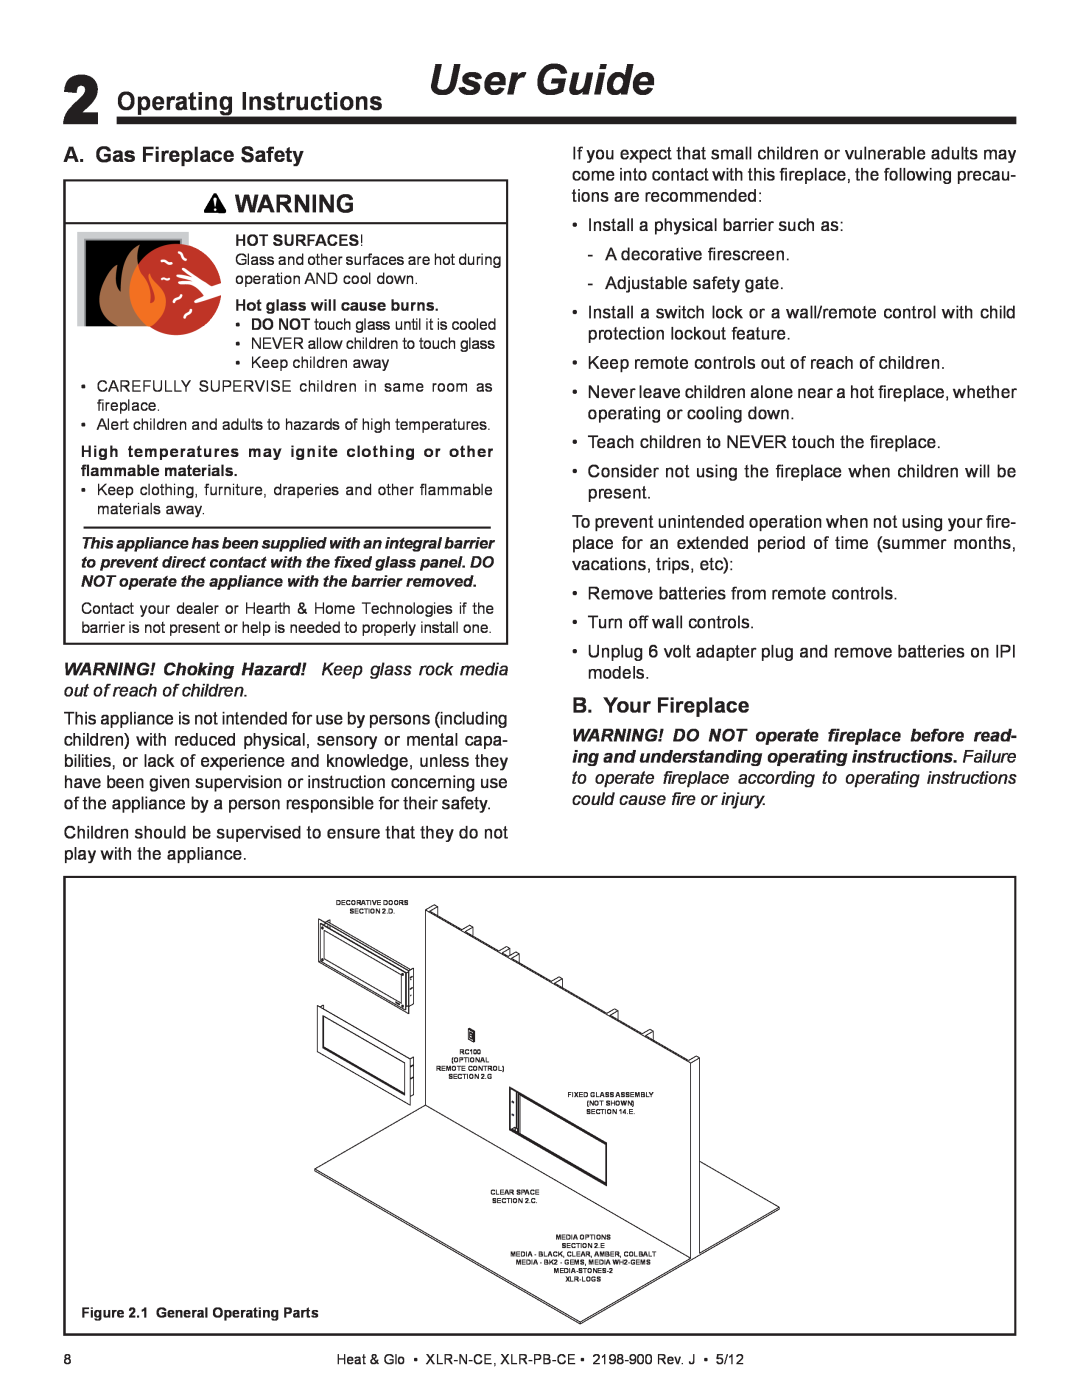 Heat & Glo LifeStyle XLR-N-CE, XLR-PB-CE Operating Instructions User Guide, A. Gas Fireplace Safety, B. Your Fireplace 